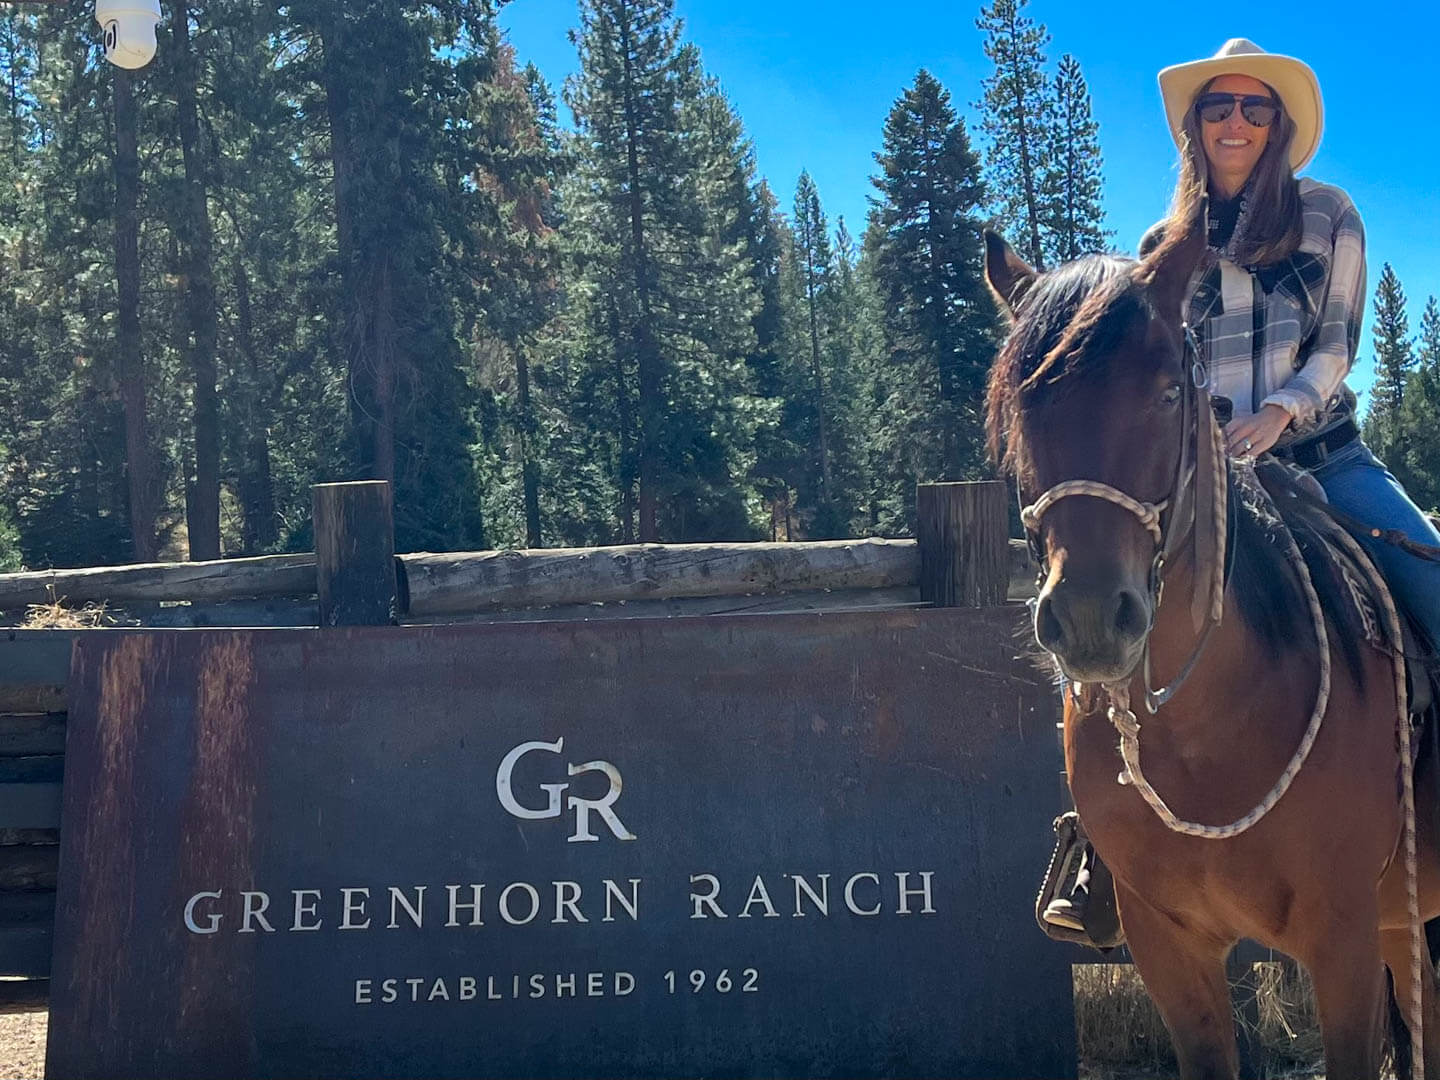 You are currently viewing The Best Guide to Greenhorn Ranch, CA (a dude ranch)